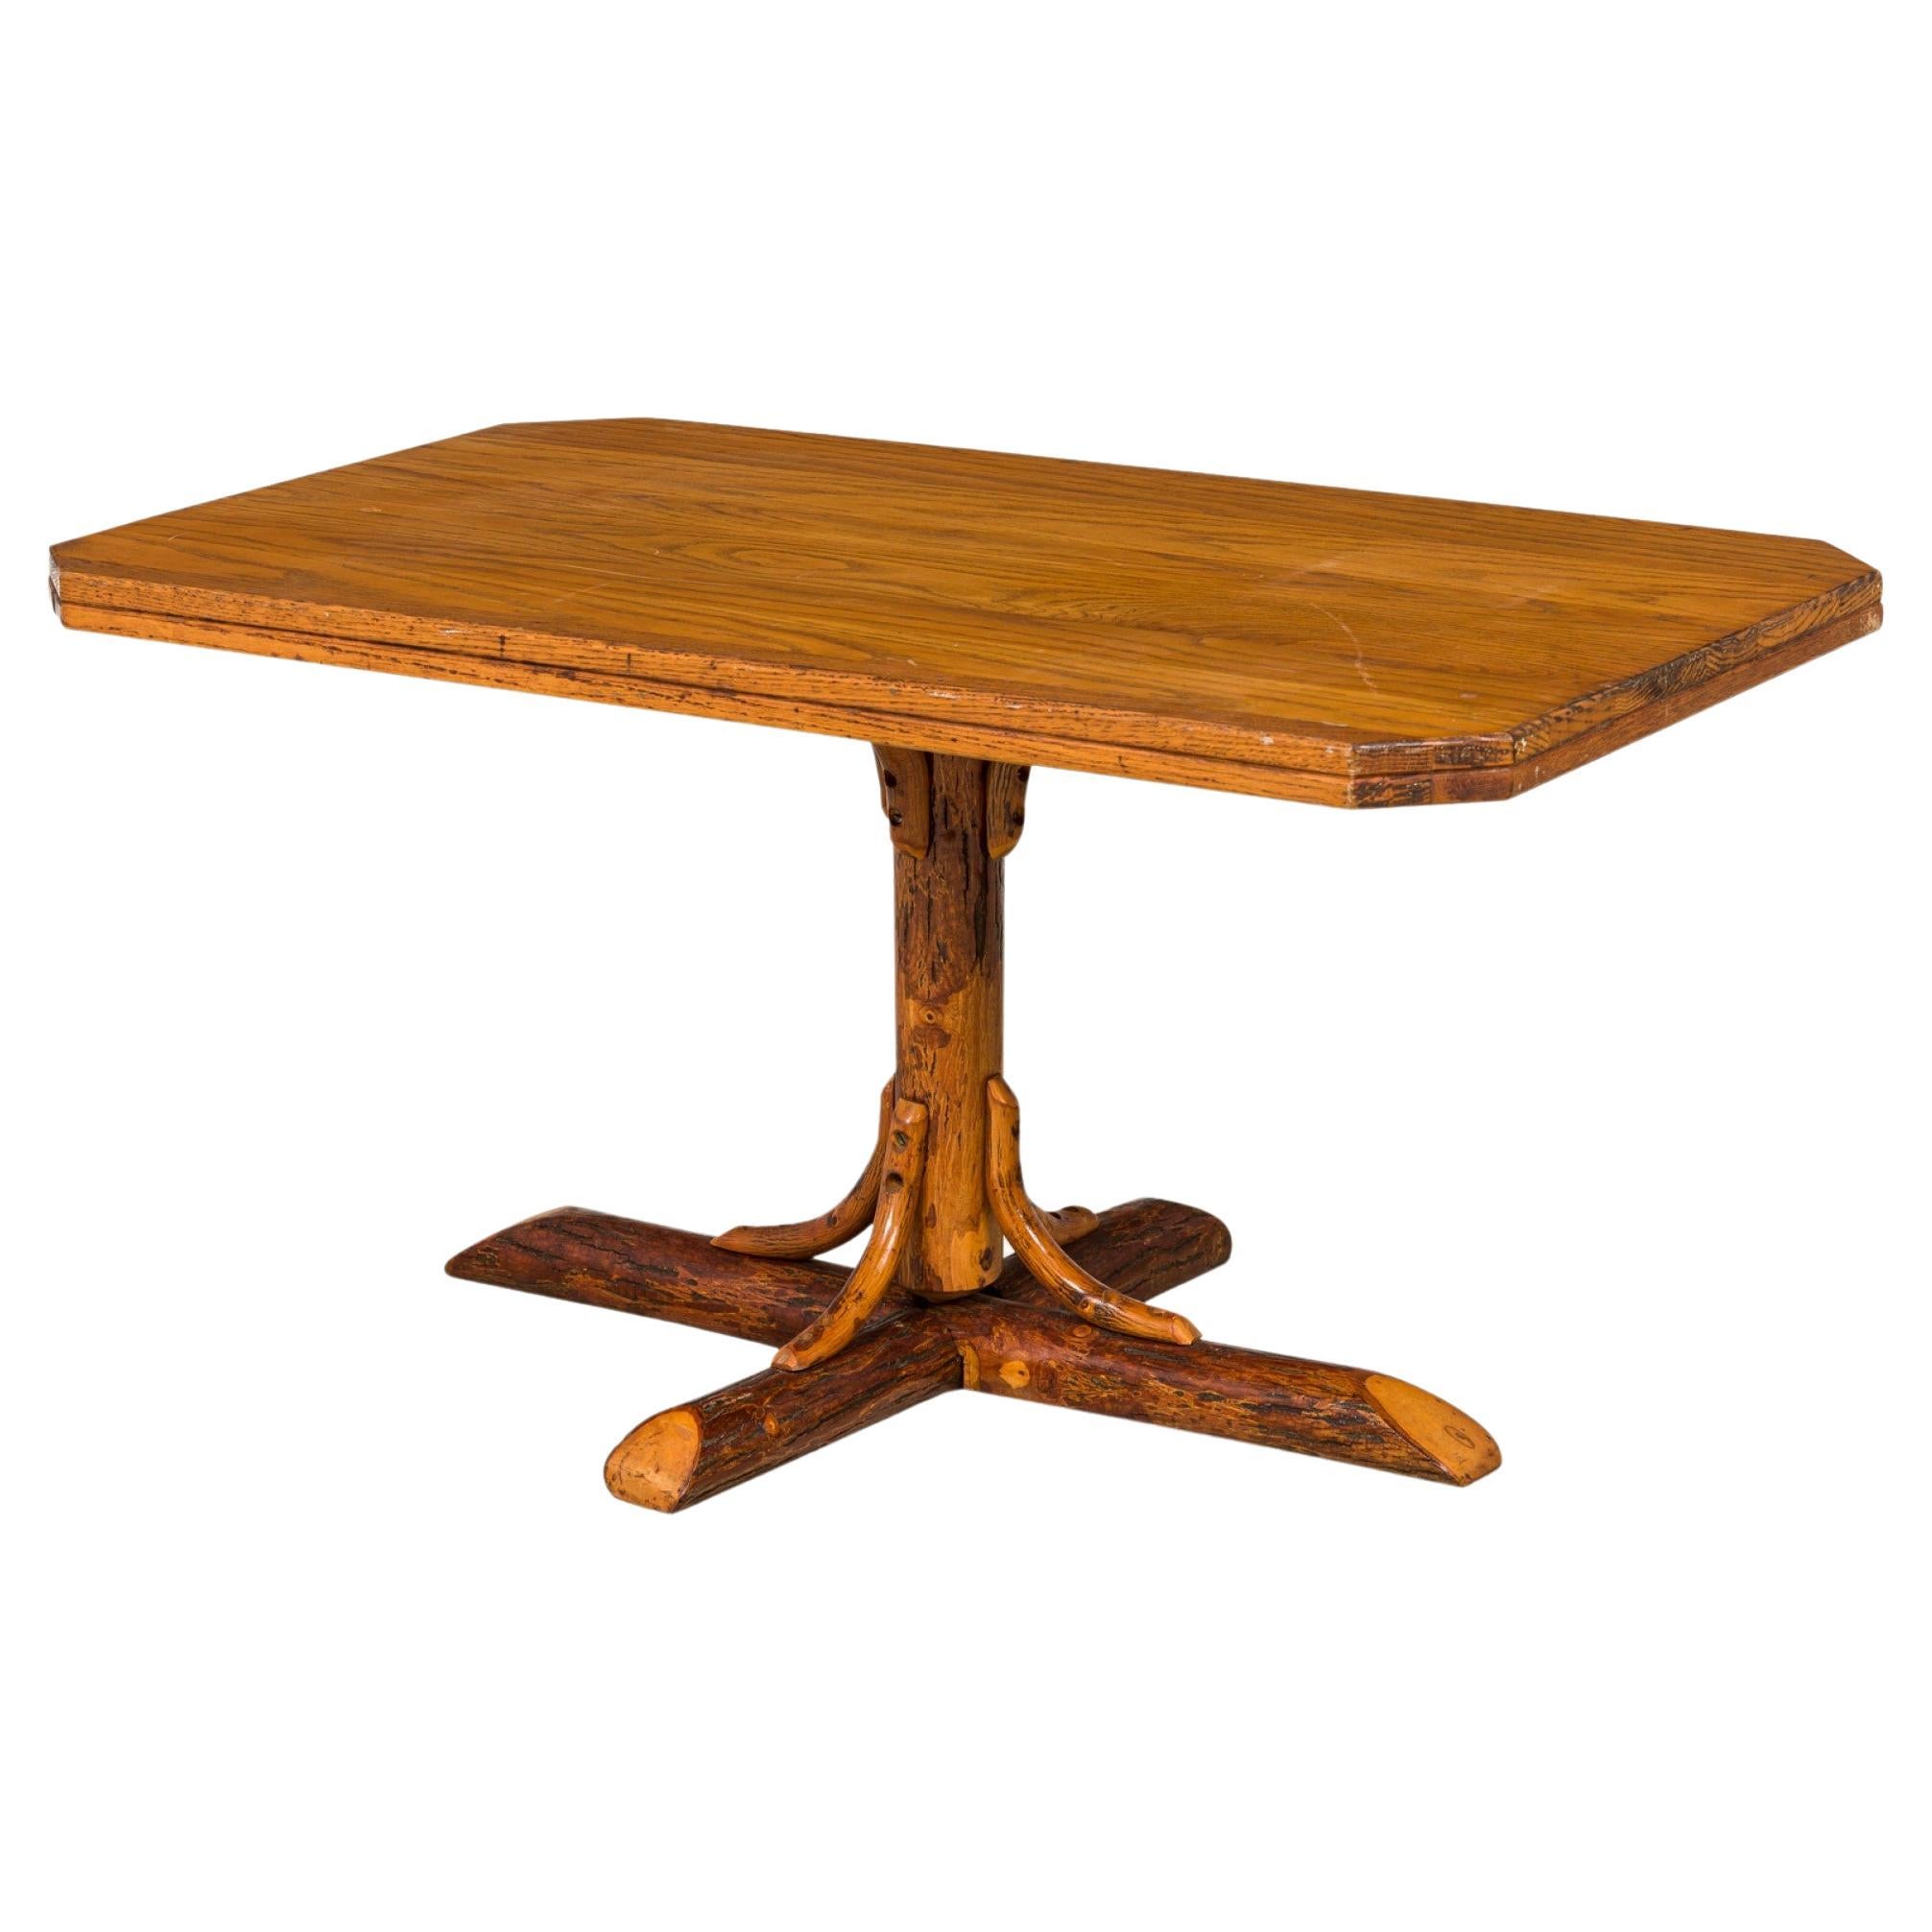 Rustic Old Hickory Wooden Pedestal Base Rectangular Coffee Table For Sale